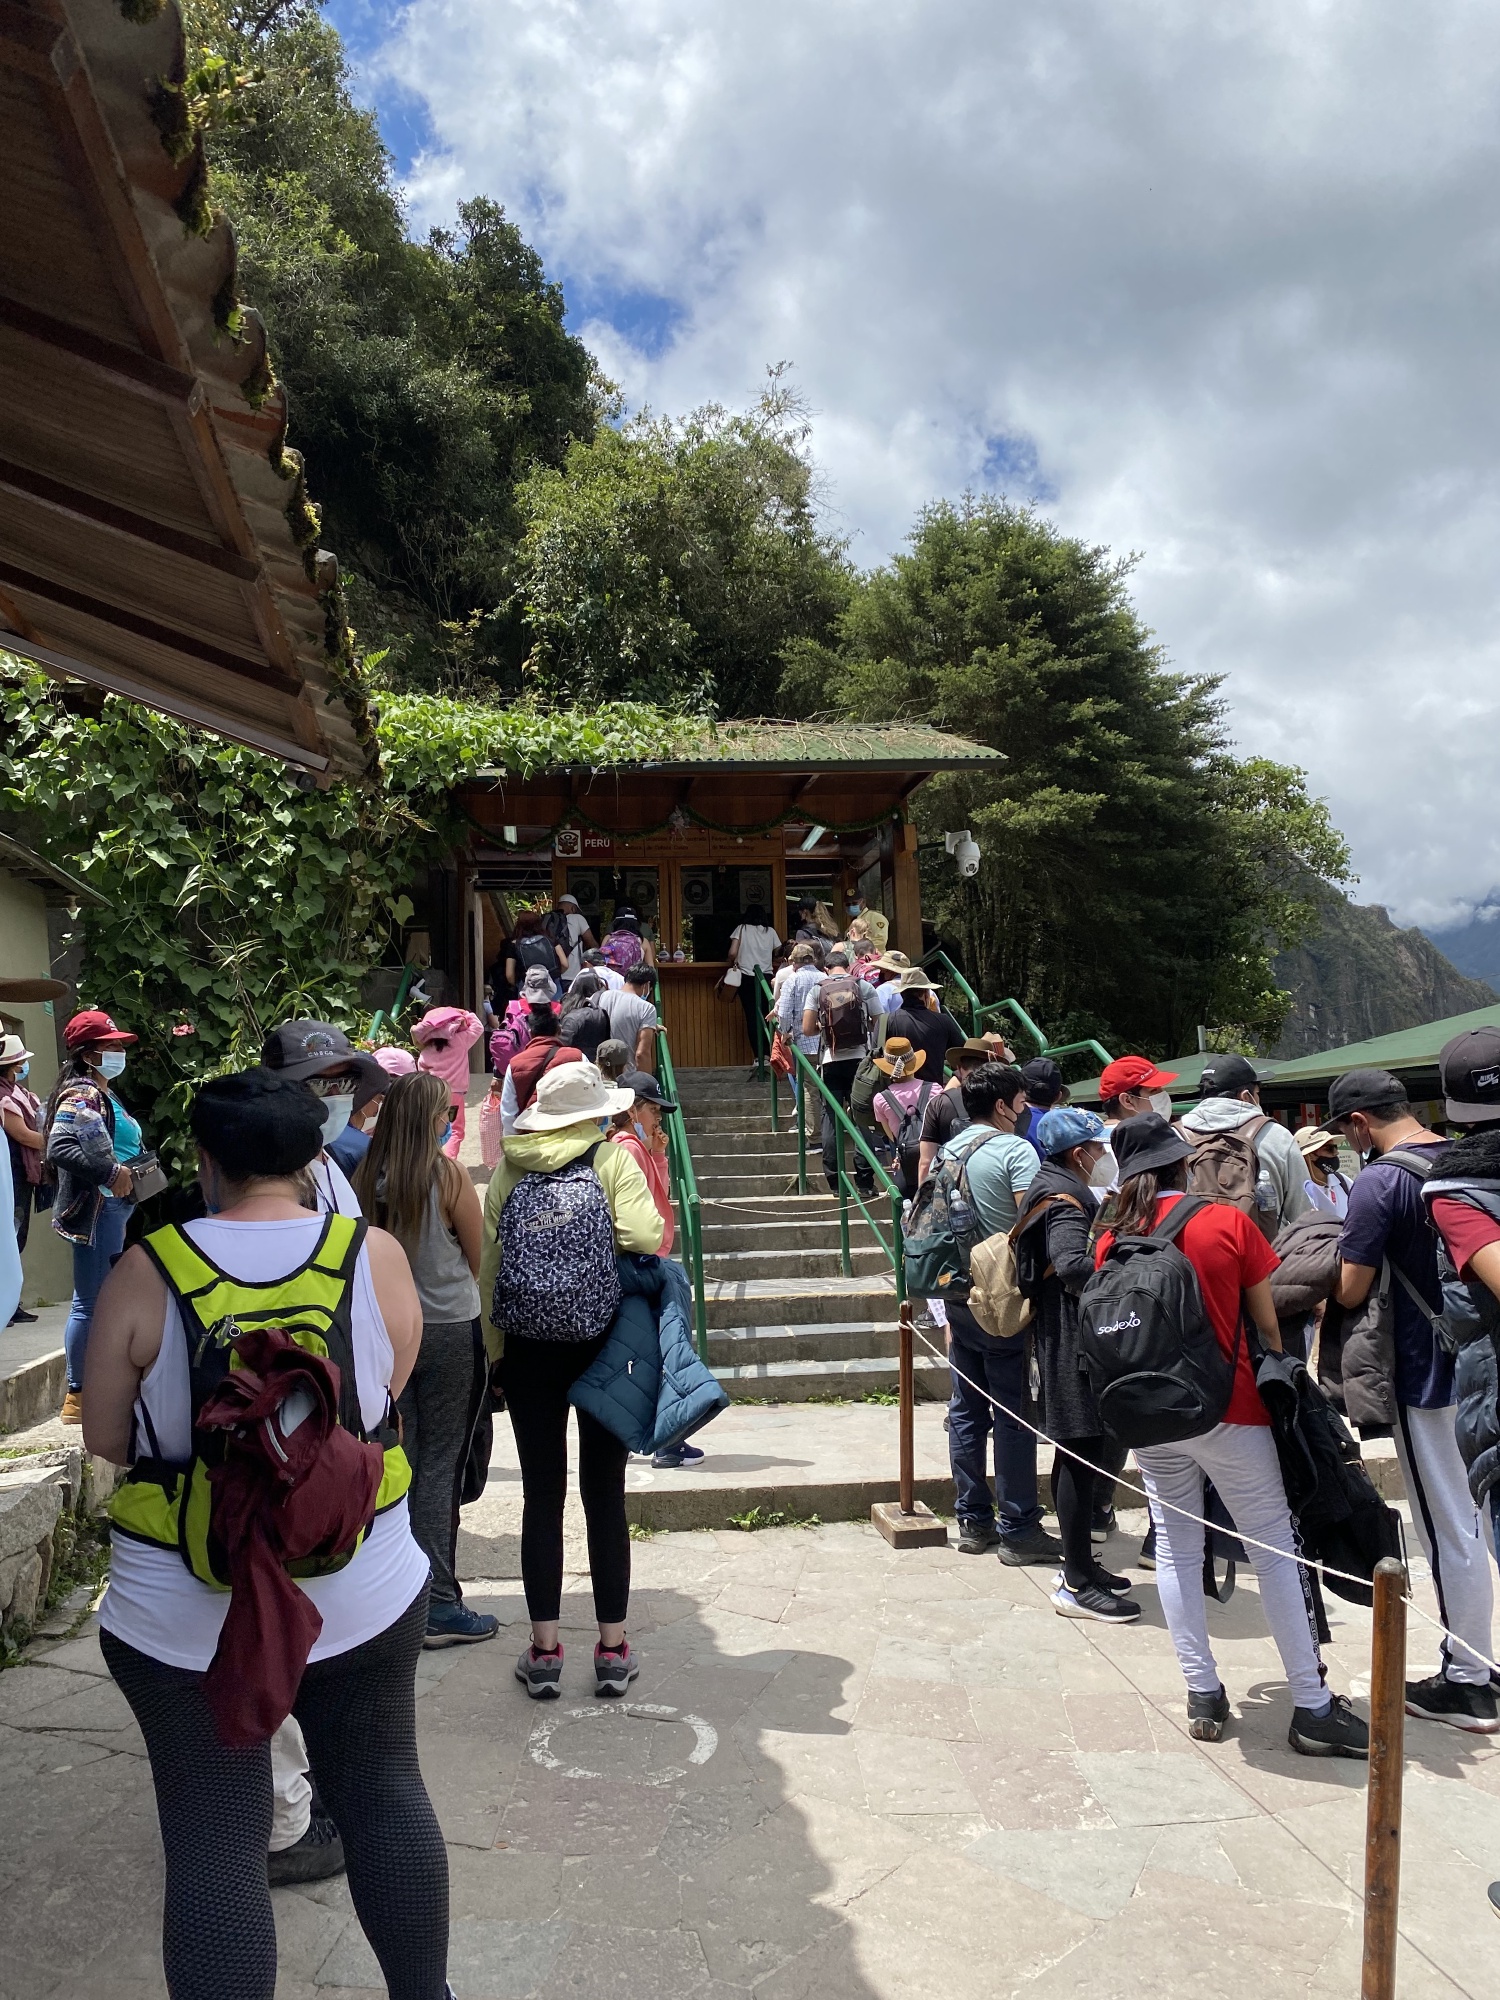 The line to get into Machu Picchu - according to our tour guide, their numbers were really affected by Covid